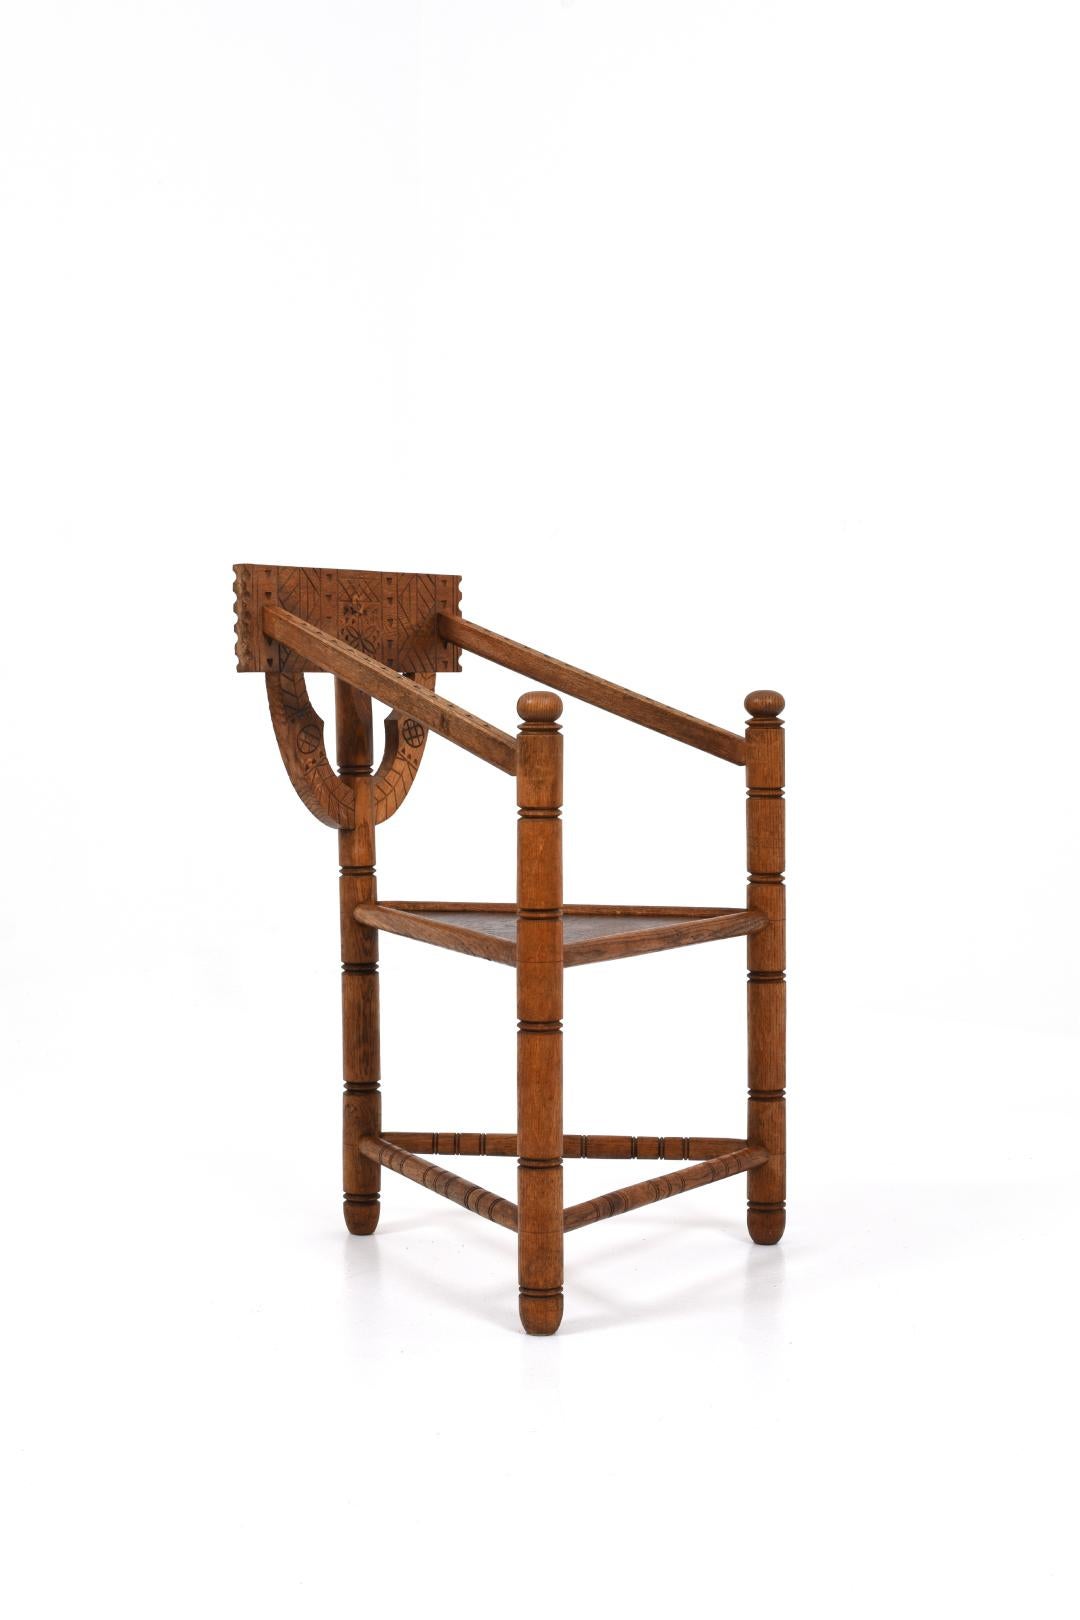 Mid-20th Century Swedish Monk Chair For Sale